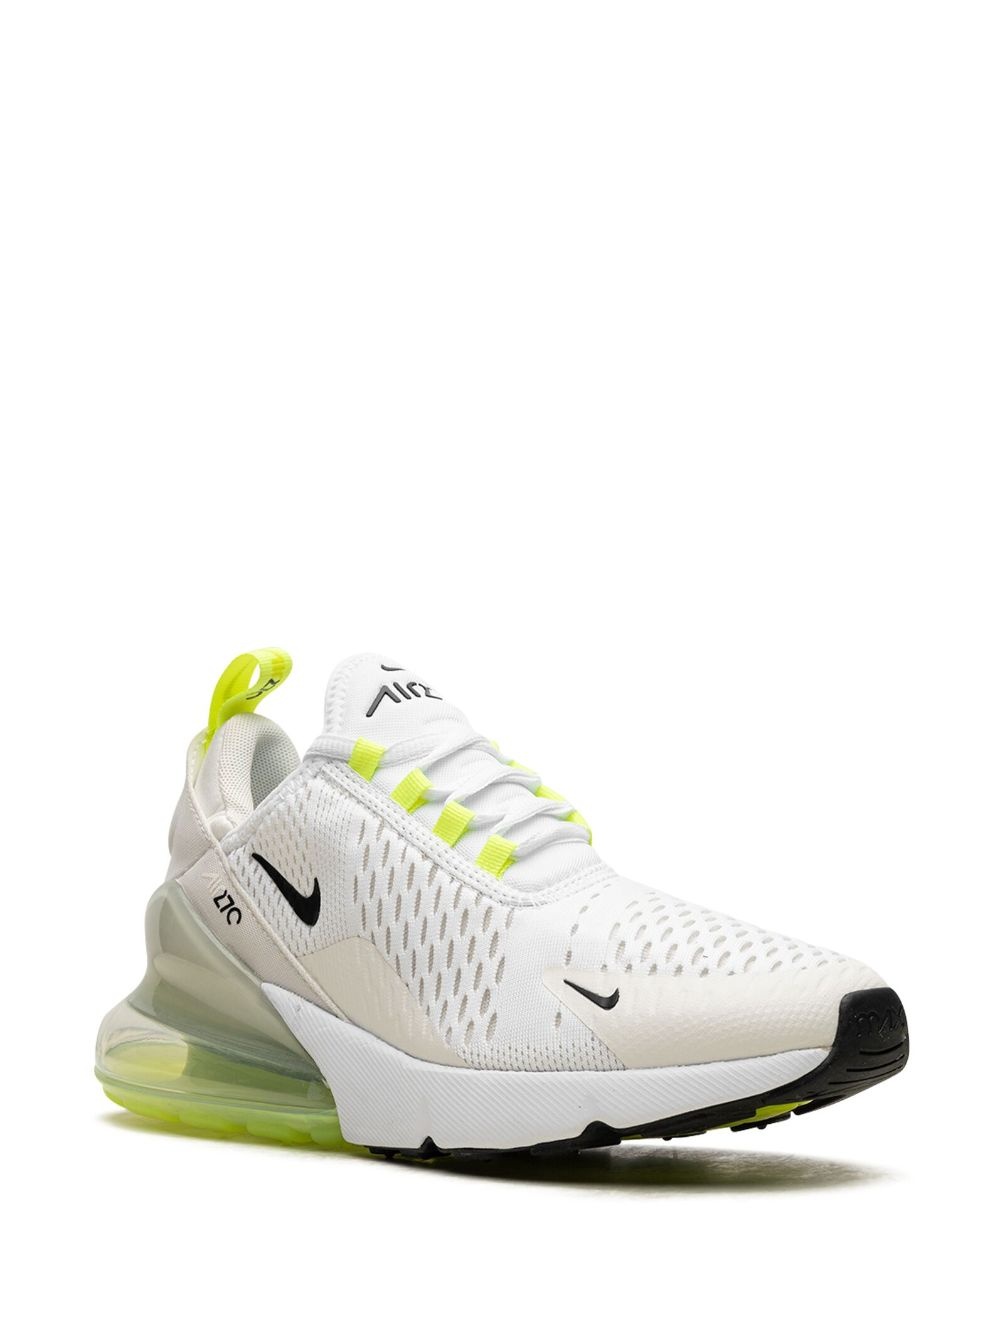 Air Max 270 "White/Ghost Green" sneakers - 2